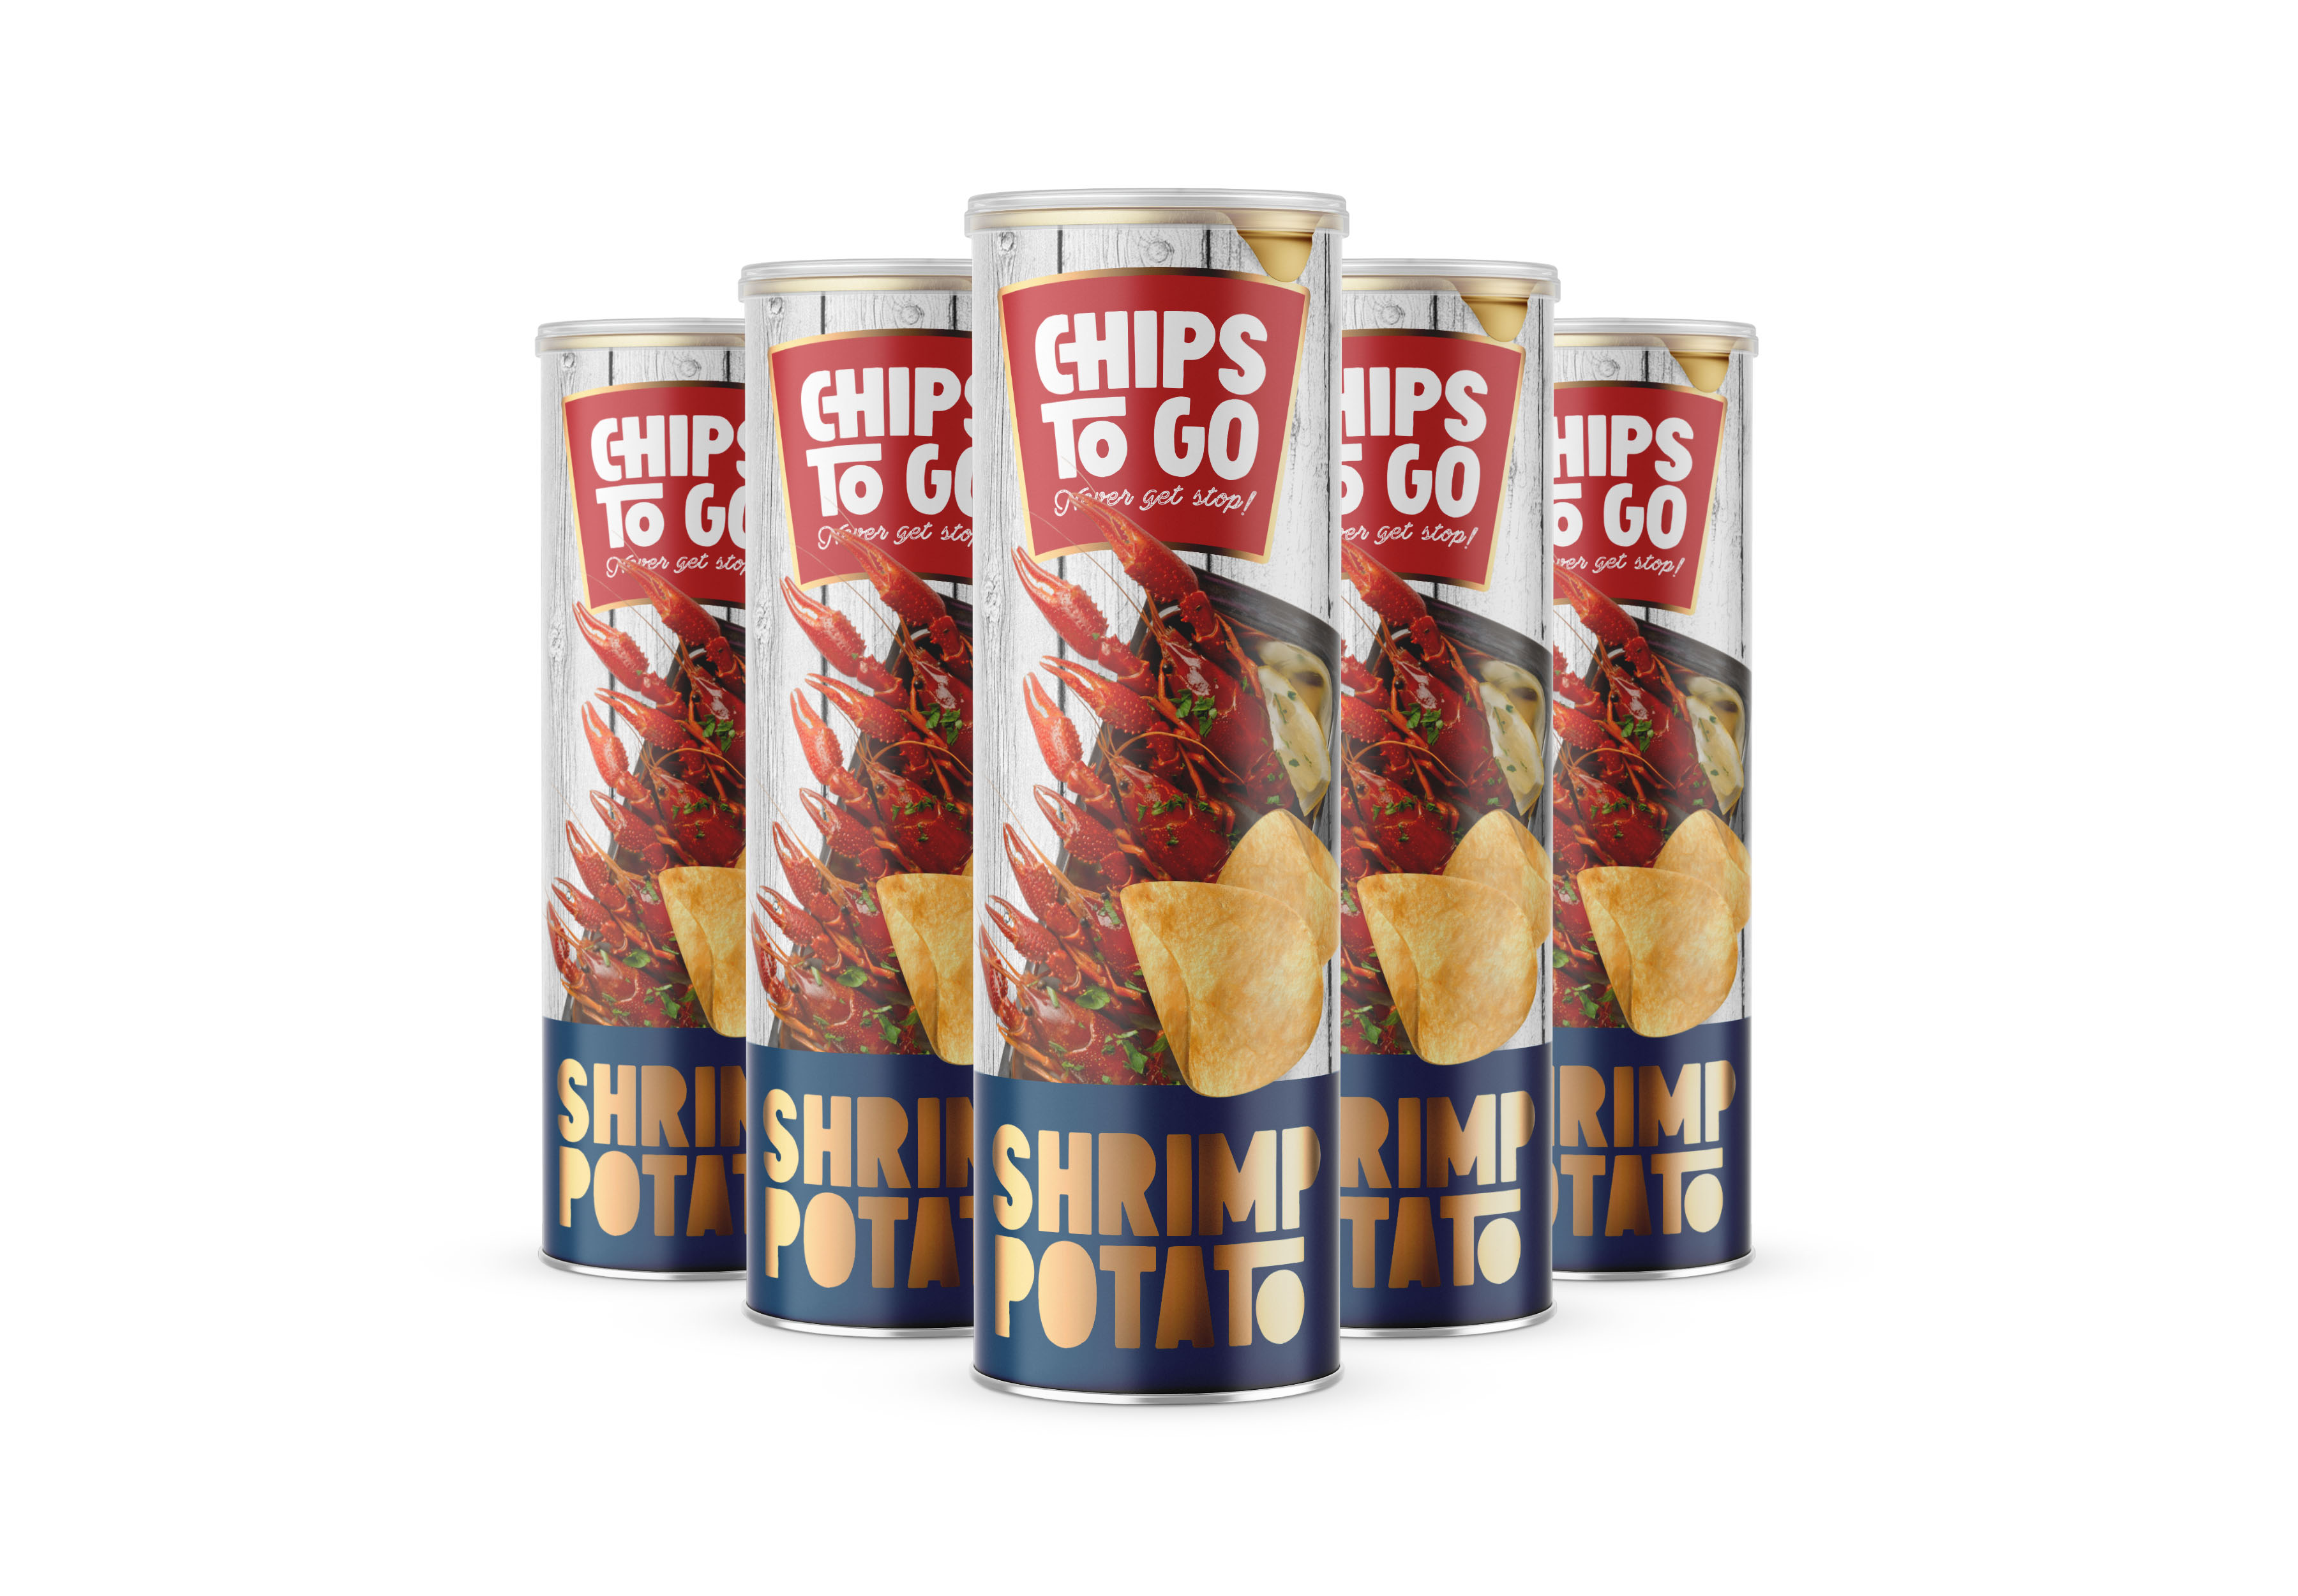 Widarto Impact Creating Snack Tube Packaging for Chips To Go